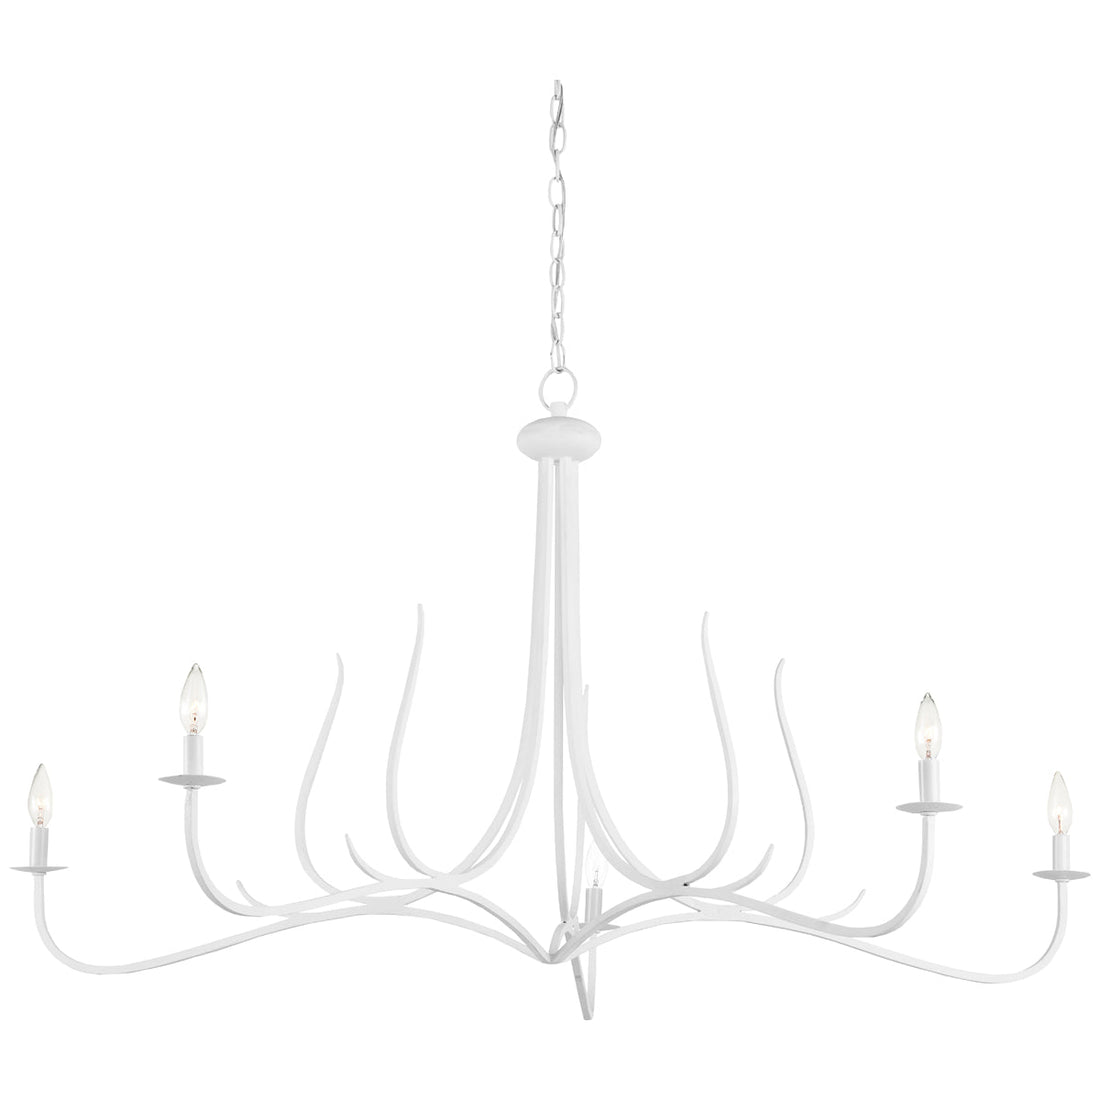 Currey and Company Passion White Chandelier